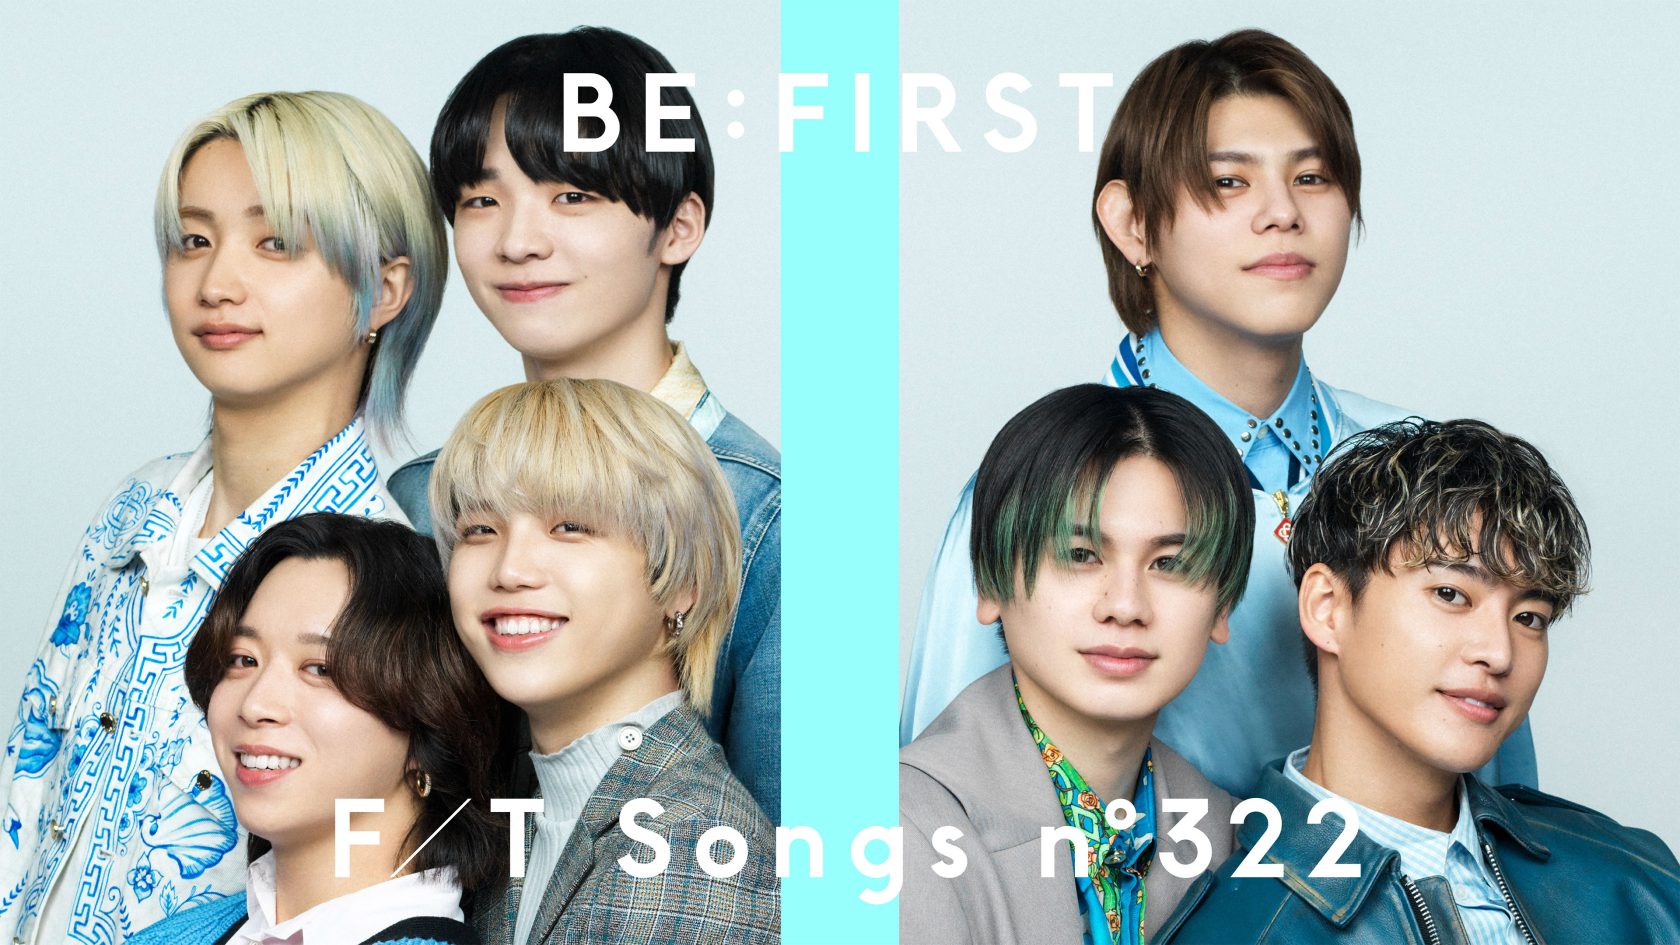 THE FIRST TAKEに再登場し「Smile Again」を披露したBE:FIRST